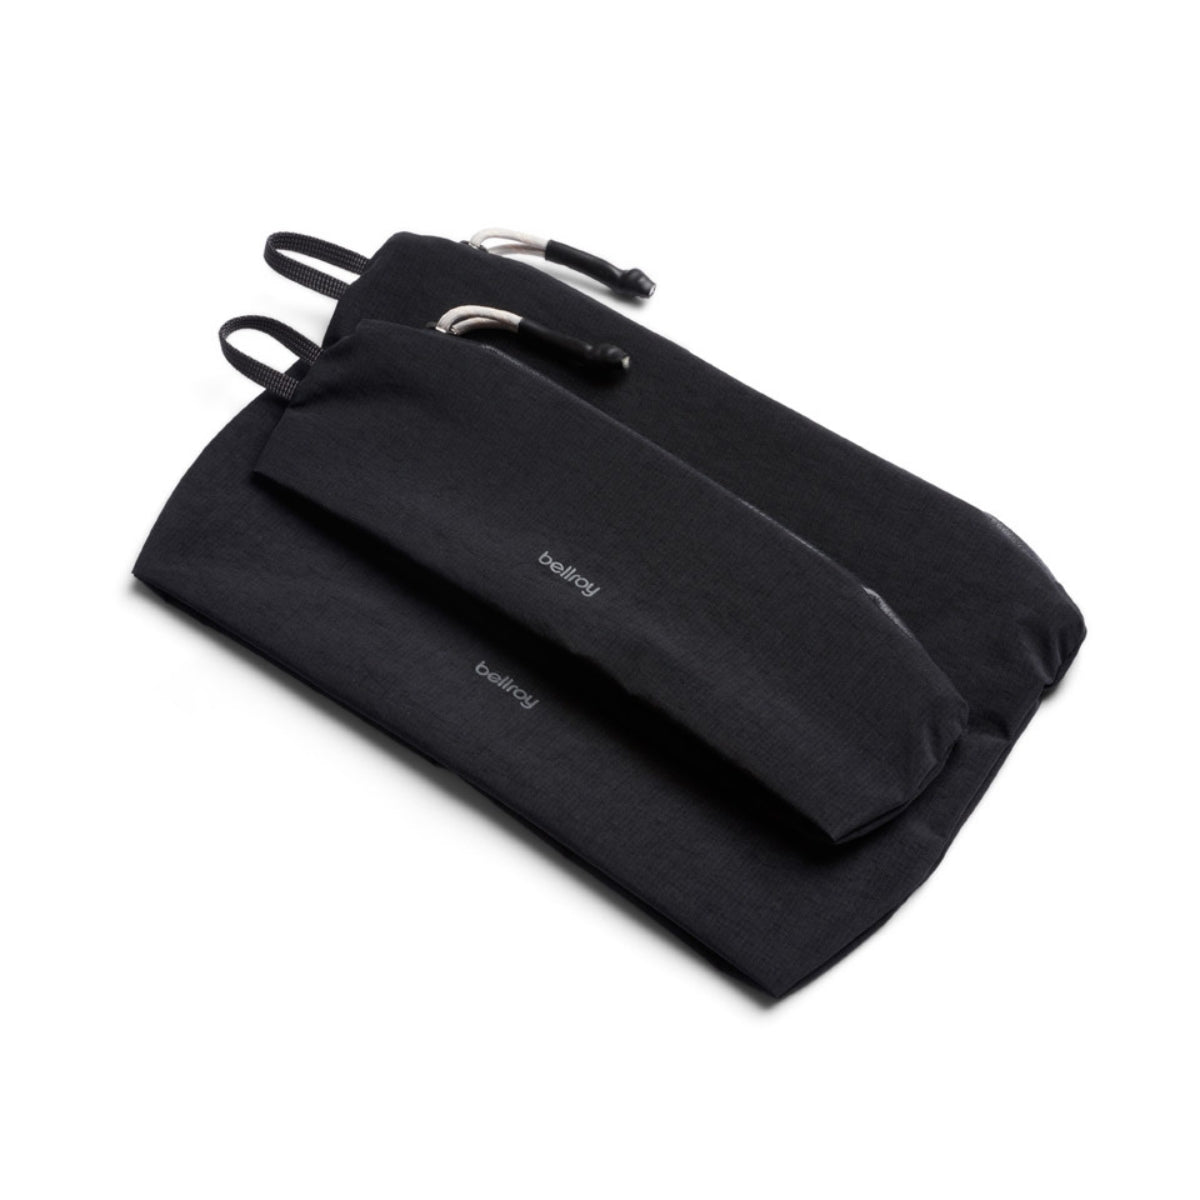 Bellroy Lite Pouch Duo in Black